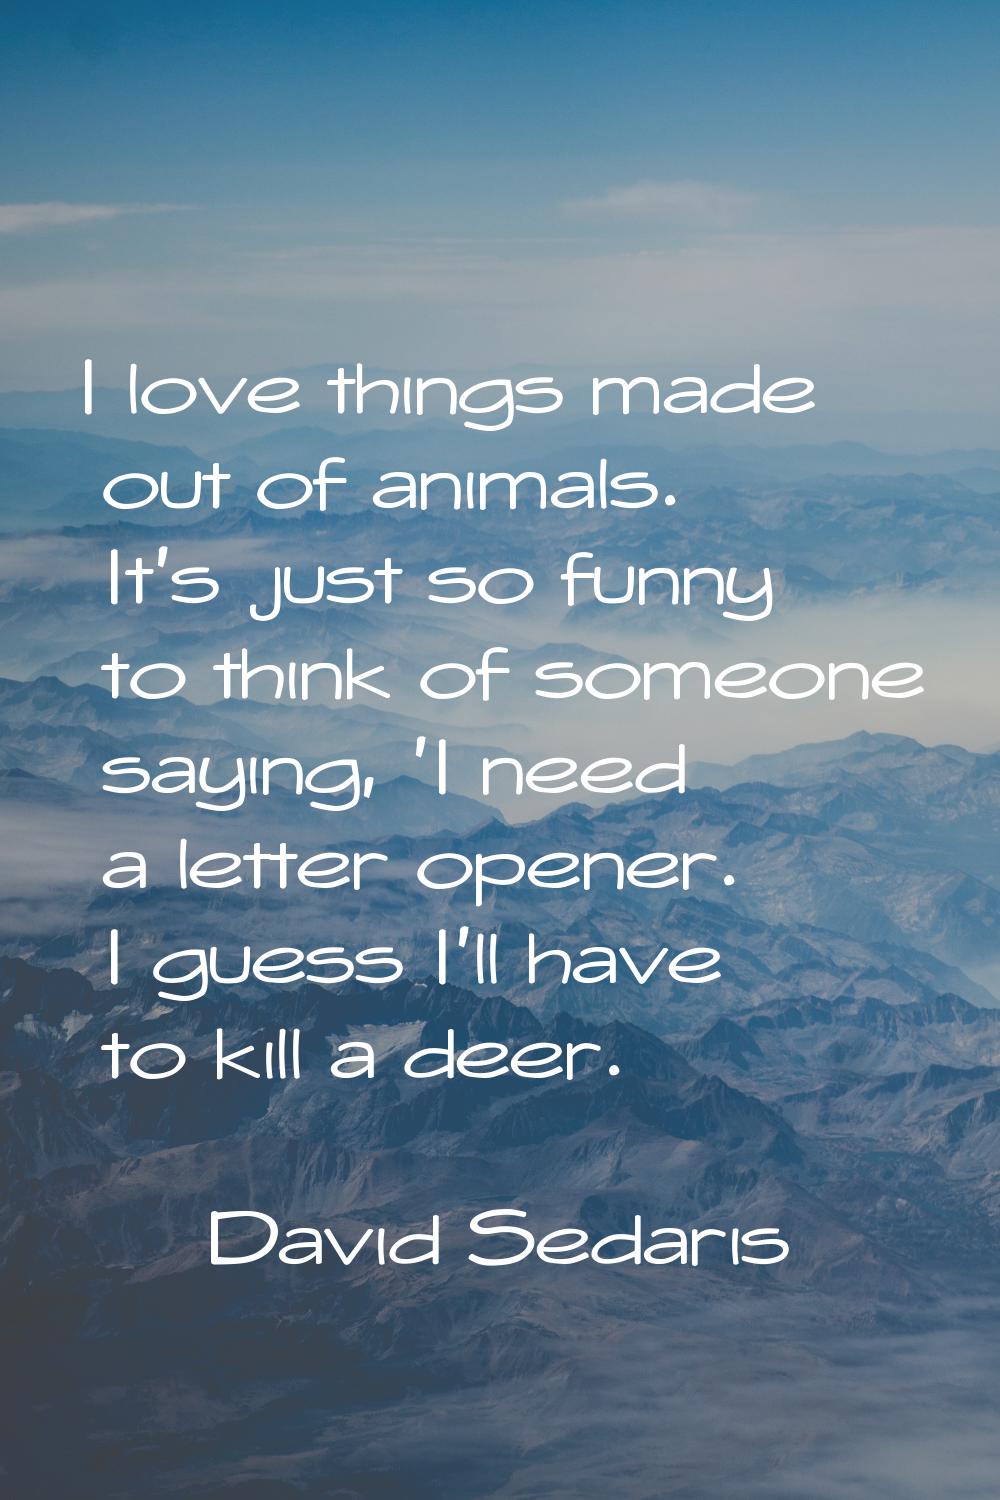 I love things made out of animals. It's just so funny to think of someone saying, 'I need a letter 